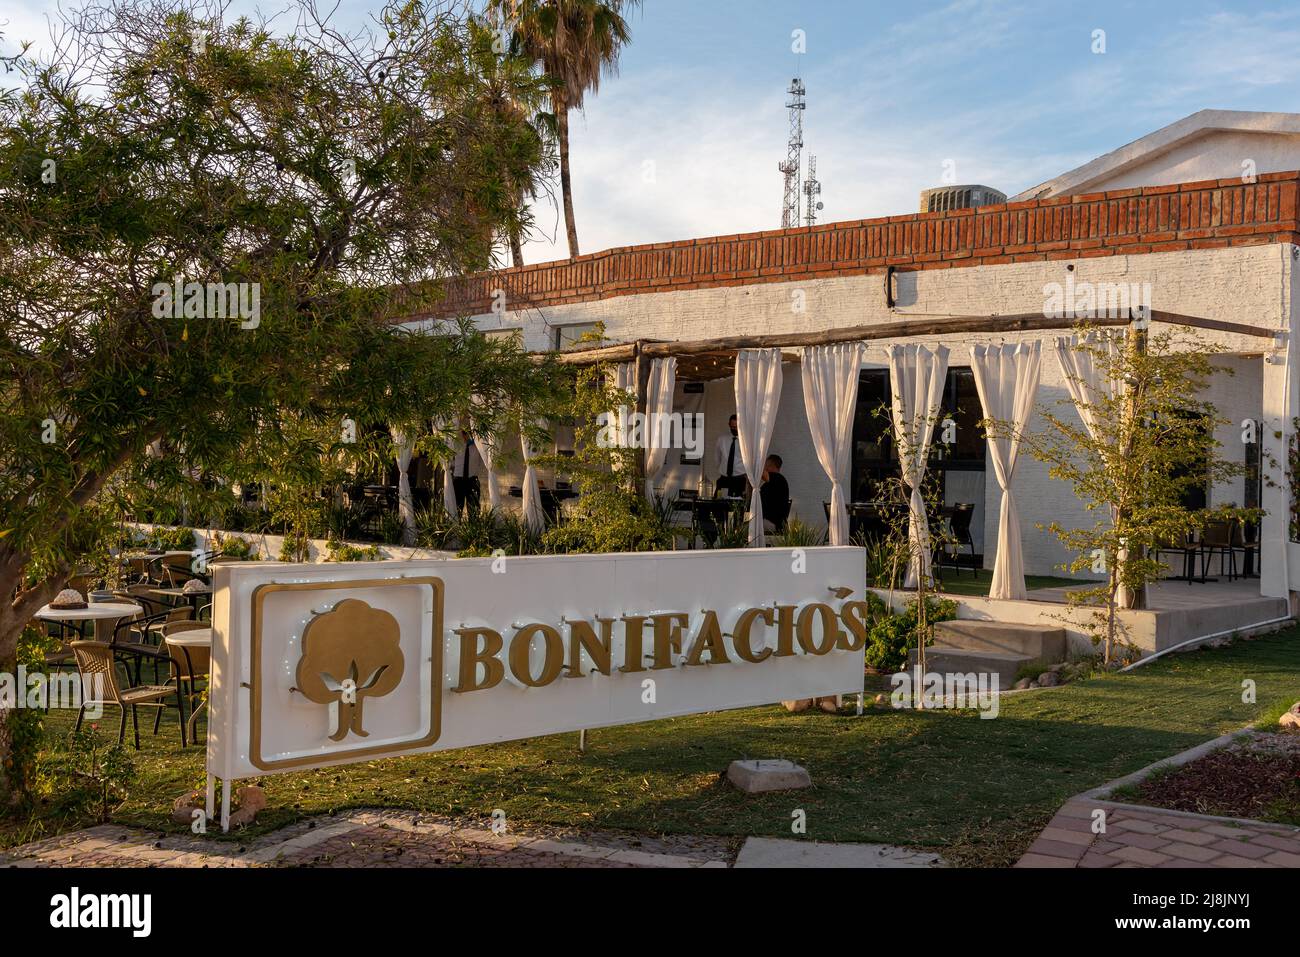 Exterior of Bonifacio’s, a fine-dining restaurant with outdoor seating framed by curtains, in San Carlos, Sonora, Mexico. Stock Photo